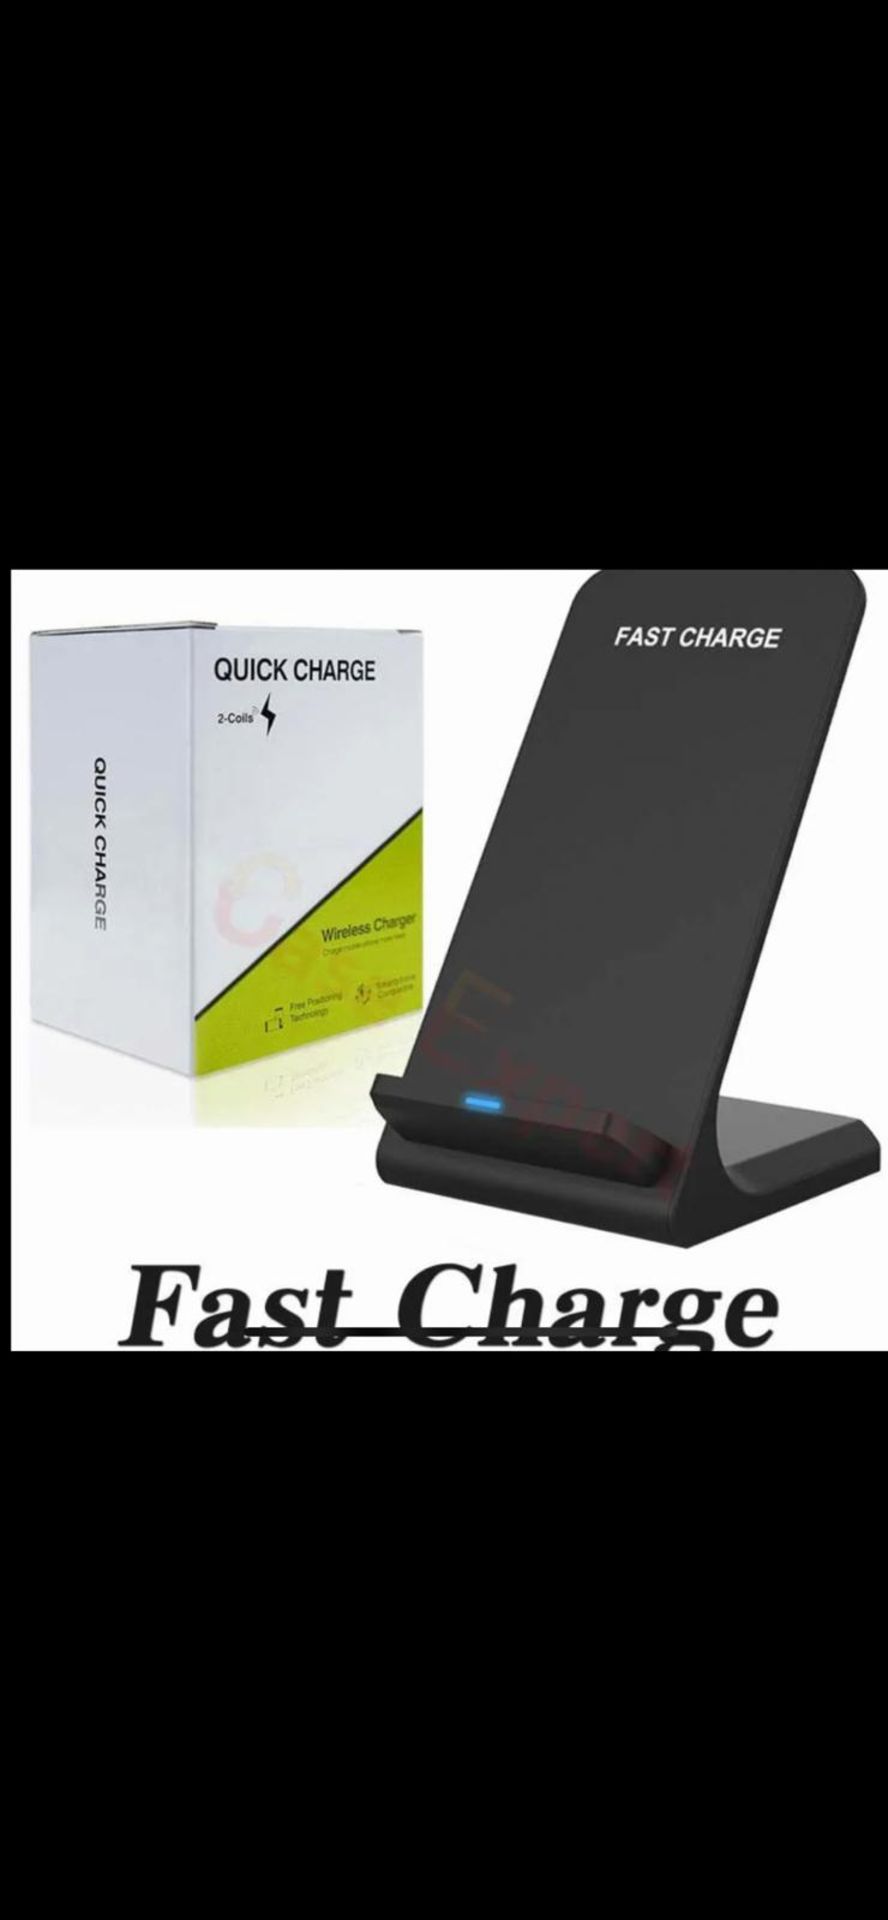 Quick Charge Wireless Charger 2.0 Two Coil  - (NEW) - RRP Â£17.99 ! - Bild 4 aus 8